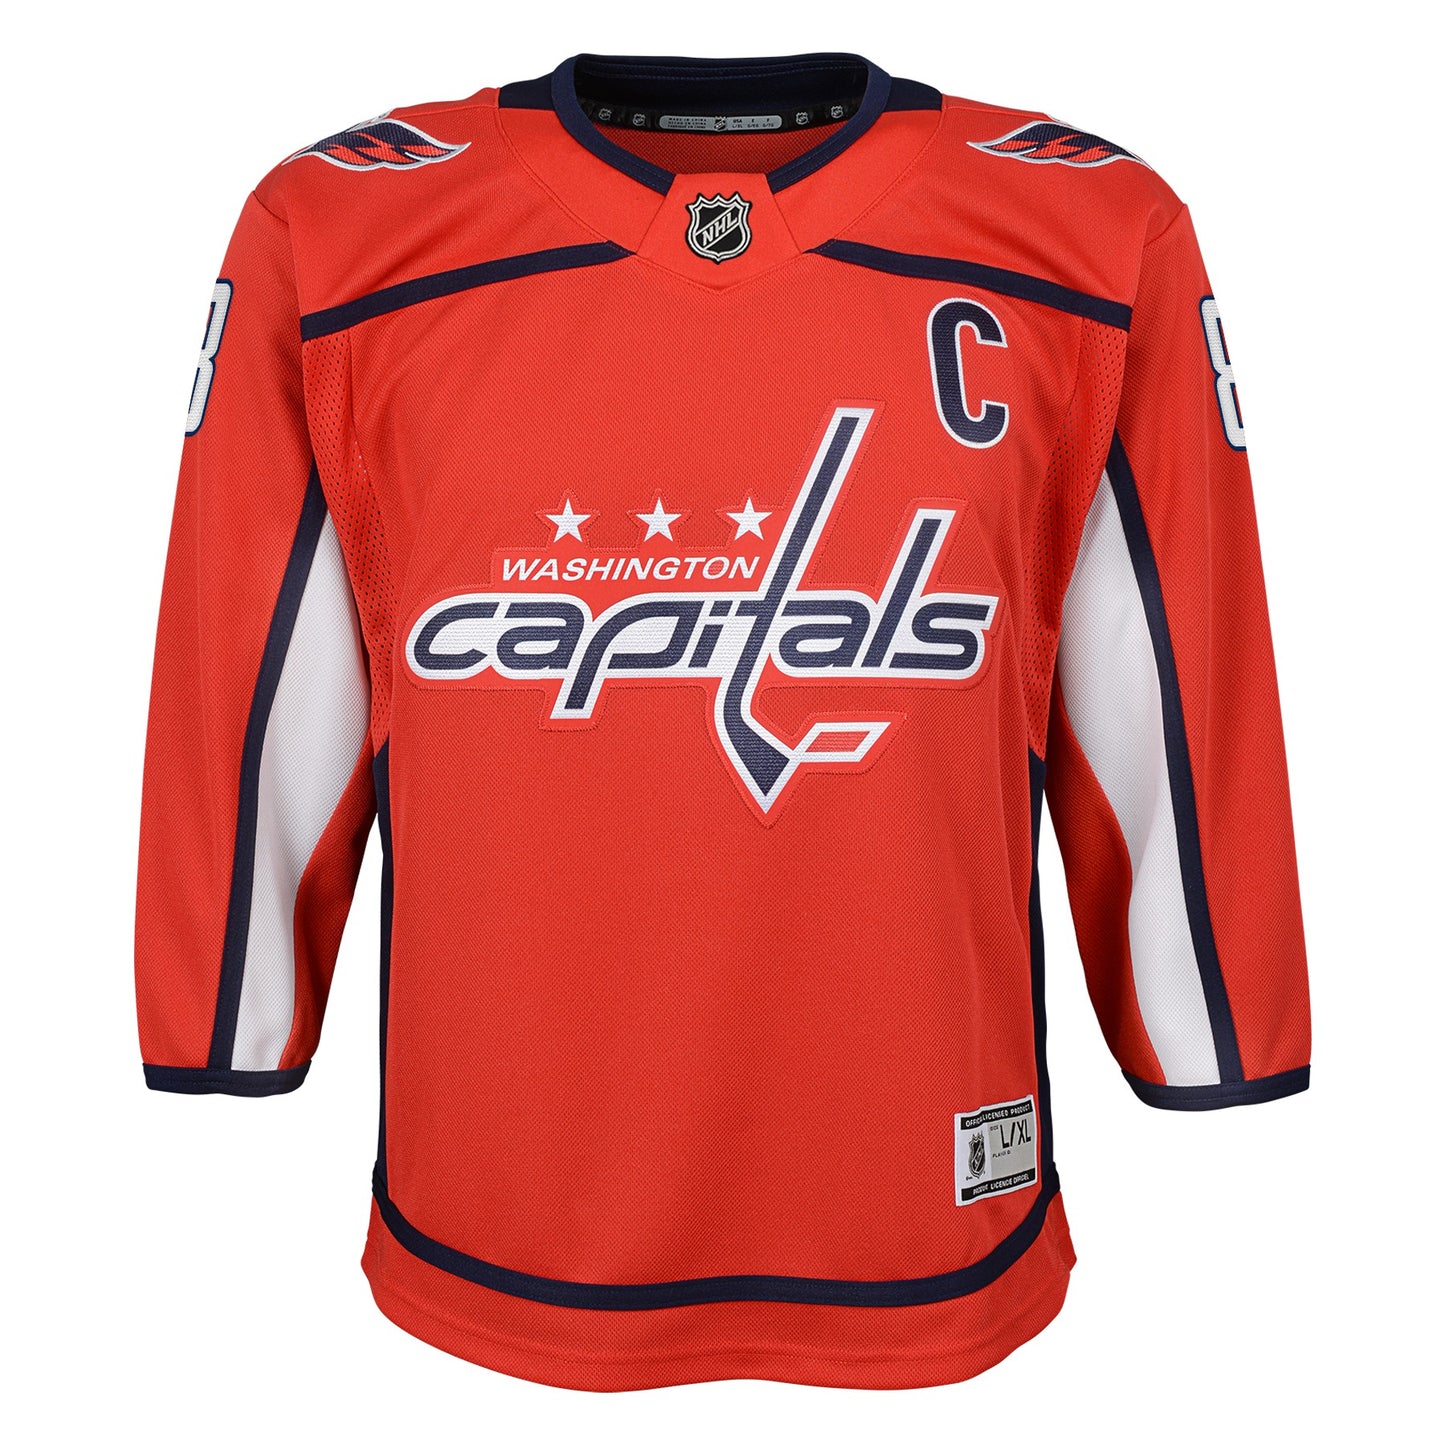 Youth Alex Ovechkin Washington Capitals Home Red Premier Jersey